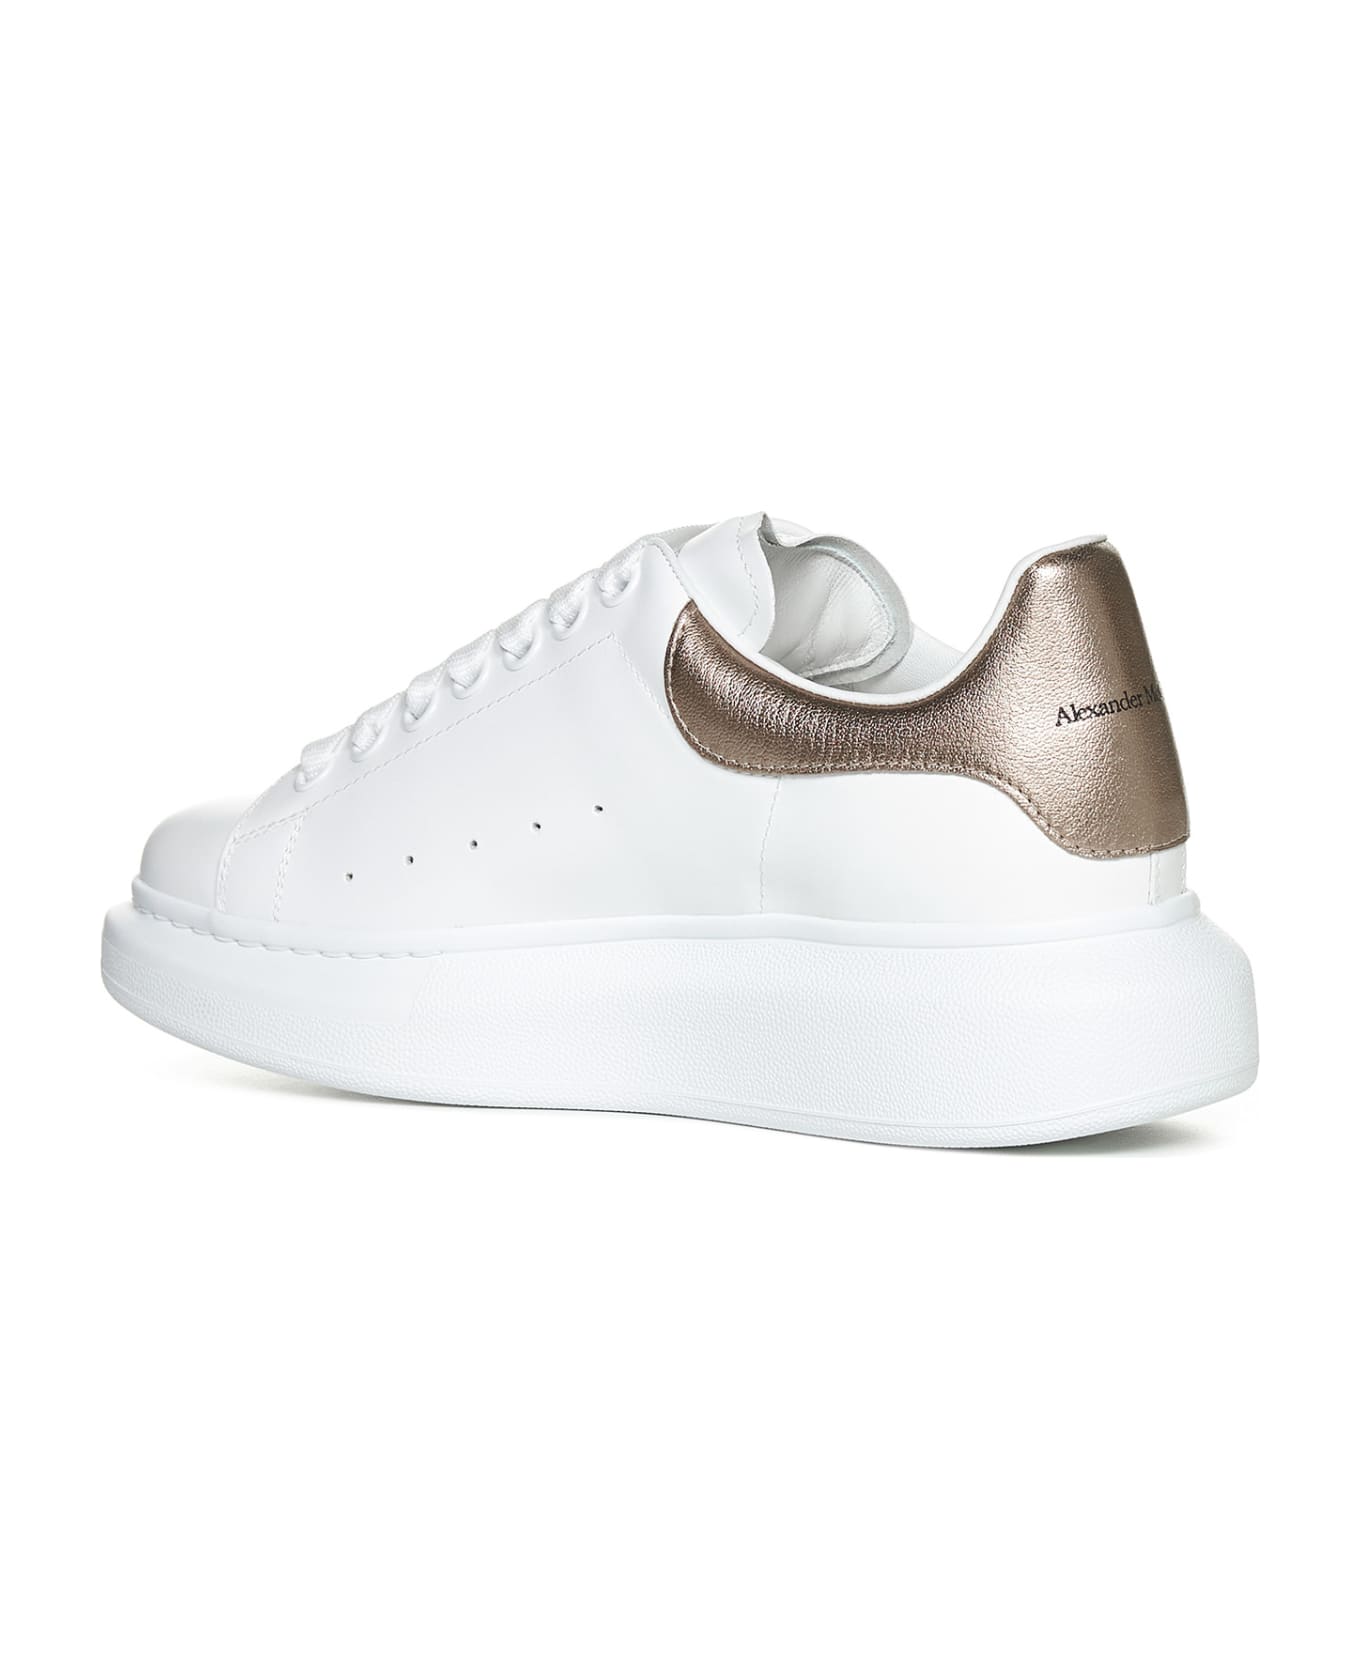 Alexander McQueen Oversized Leather Sneakers - White/rose Gold 171 スニーカー